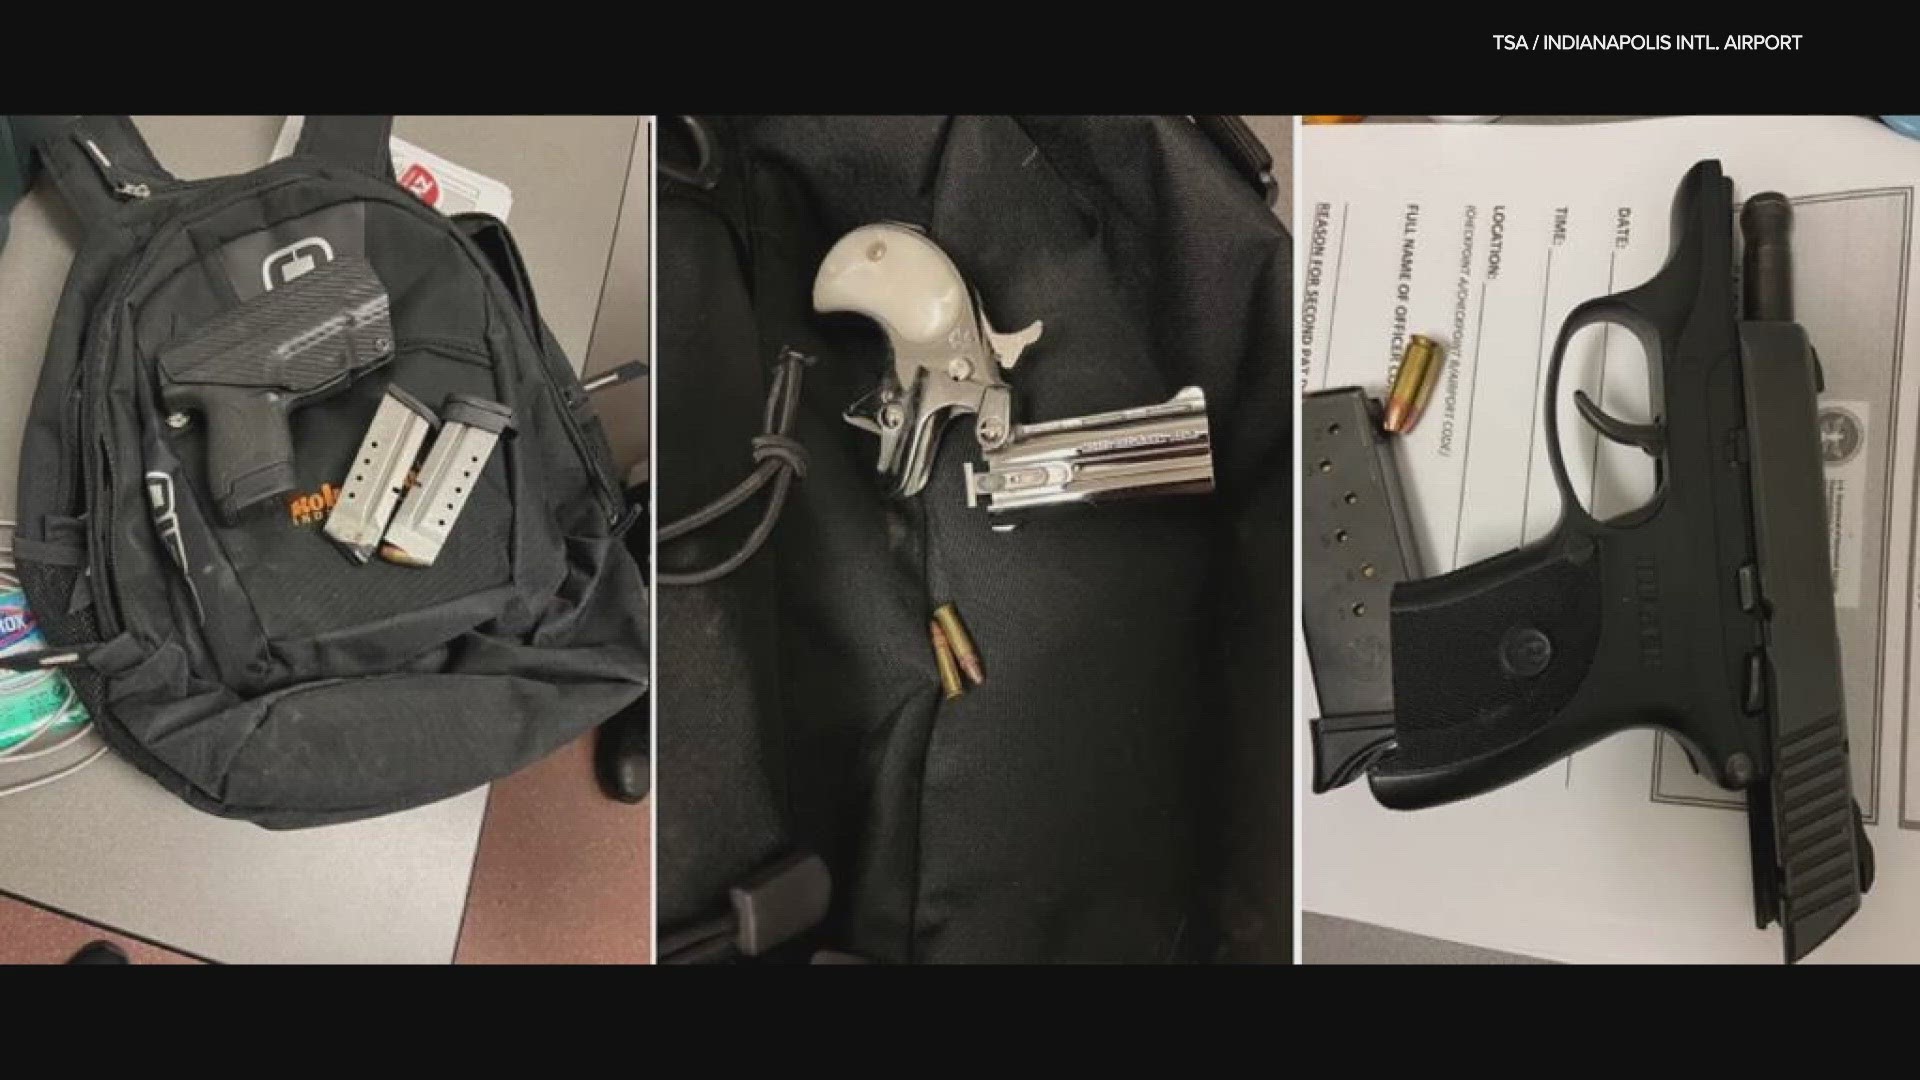 TSA has detected 75 guns this year at Indy's airport. That's the highest number of weapons ever found at the airport in a single year.